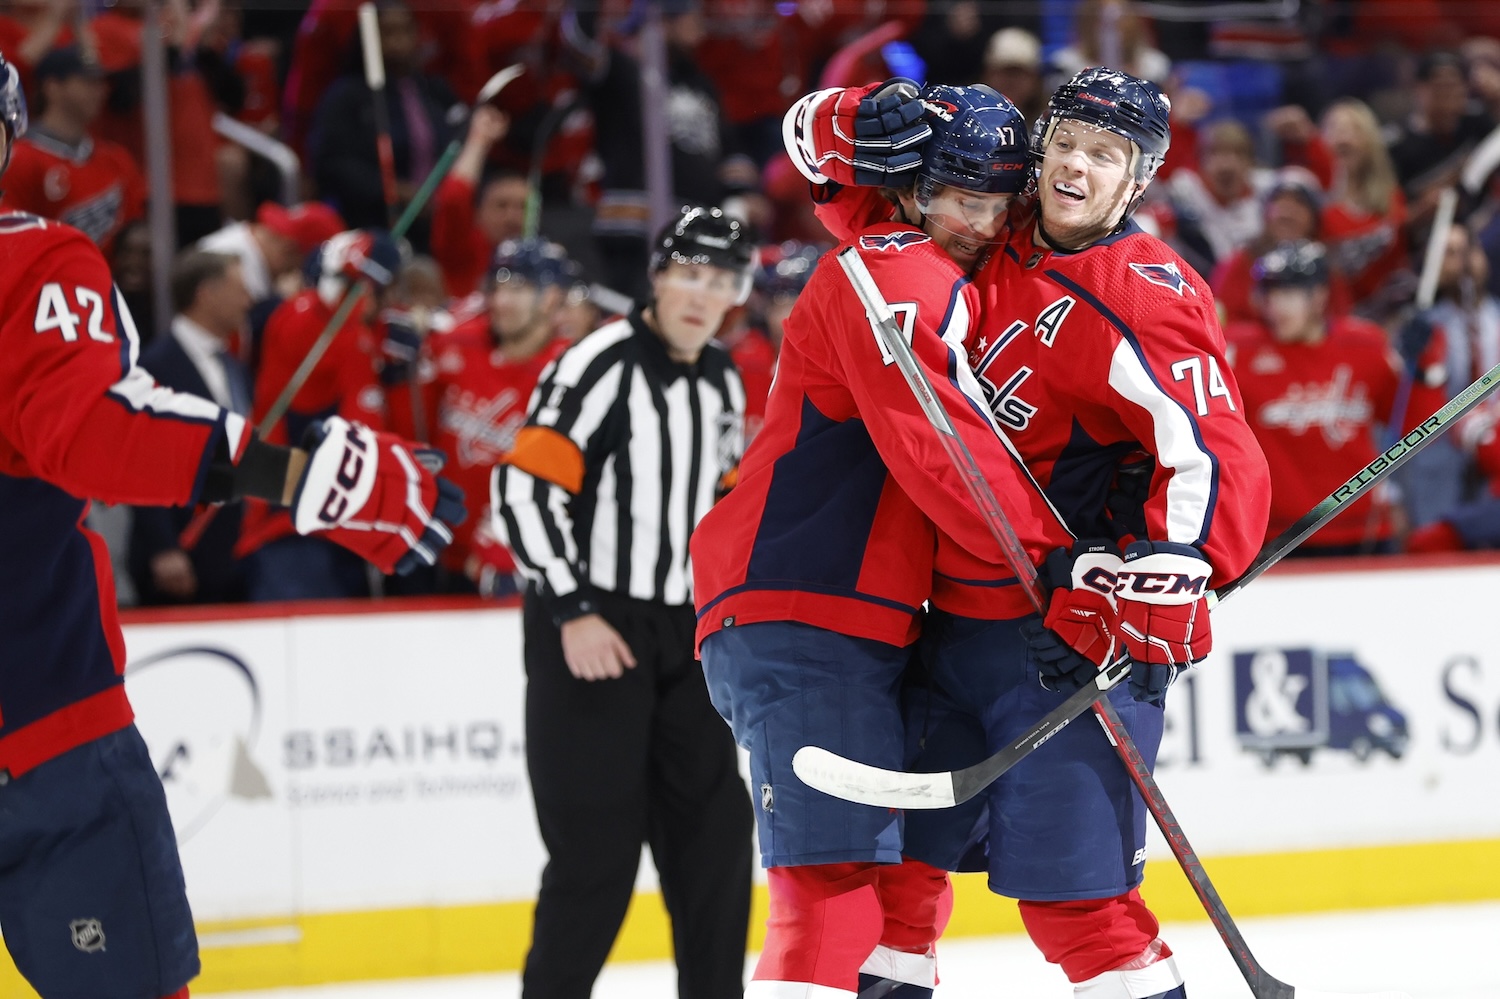 Apr 15, 2024; Washington, District of Columbia, USA; Washington Capitals defenseman John Carlson (74) celebrates with Capitals center Dylan Strome (17) after scoring a goal against the Boston Bruins in the first period at Capital One Arena. Mandatory Credit: Geoff Burke-USA TODAY Sports